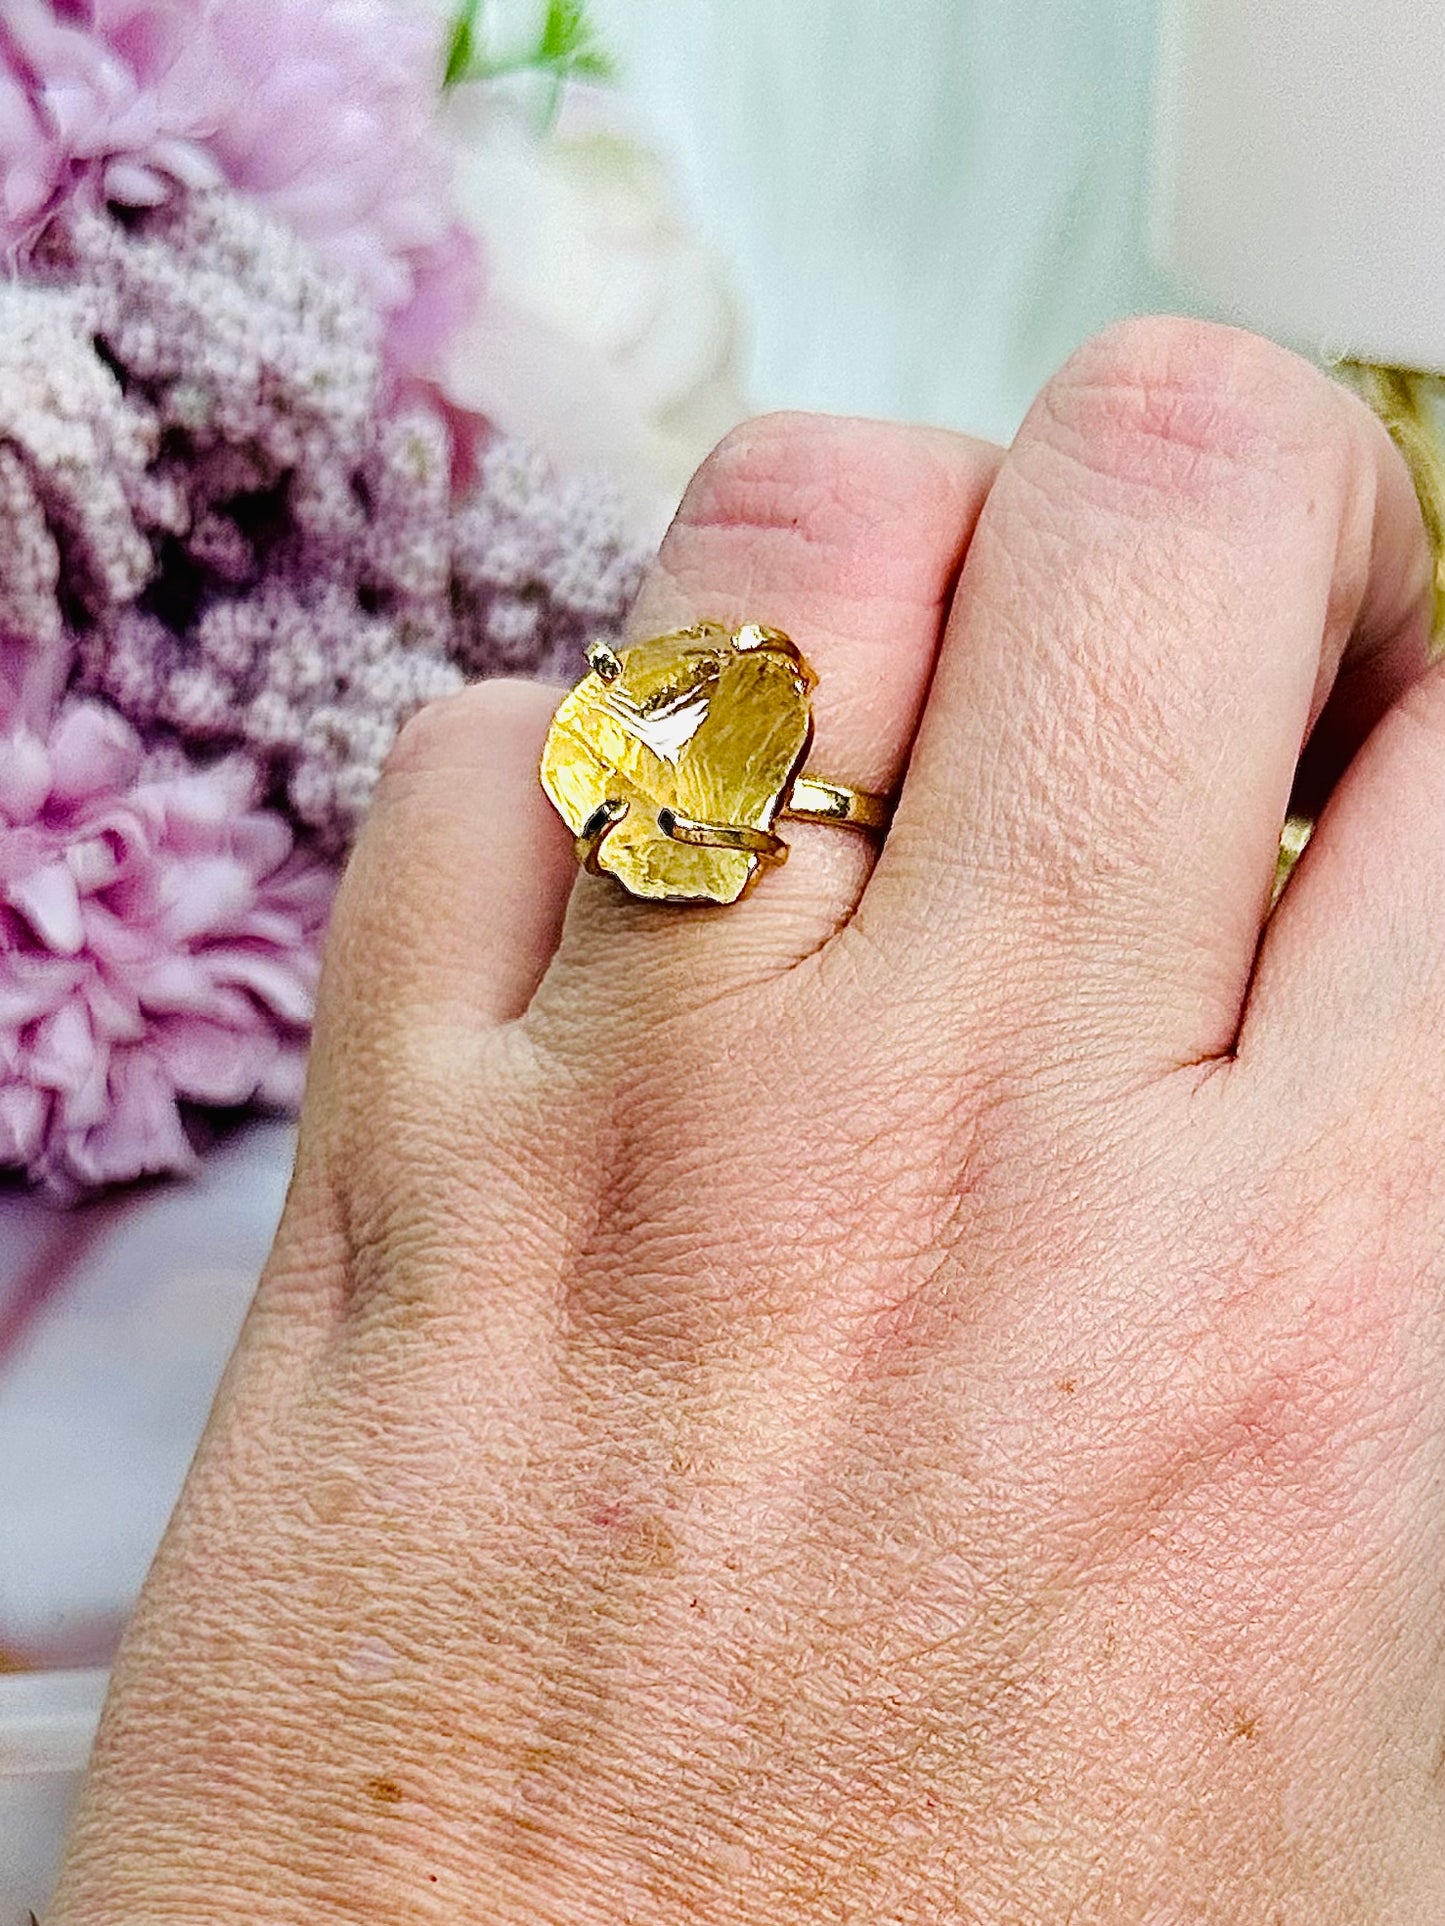 Stunning Citrine Adjustable Gold Plated Ring From Brazil In Gift Bag ~ Absolutely Gorgeous